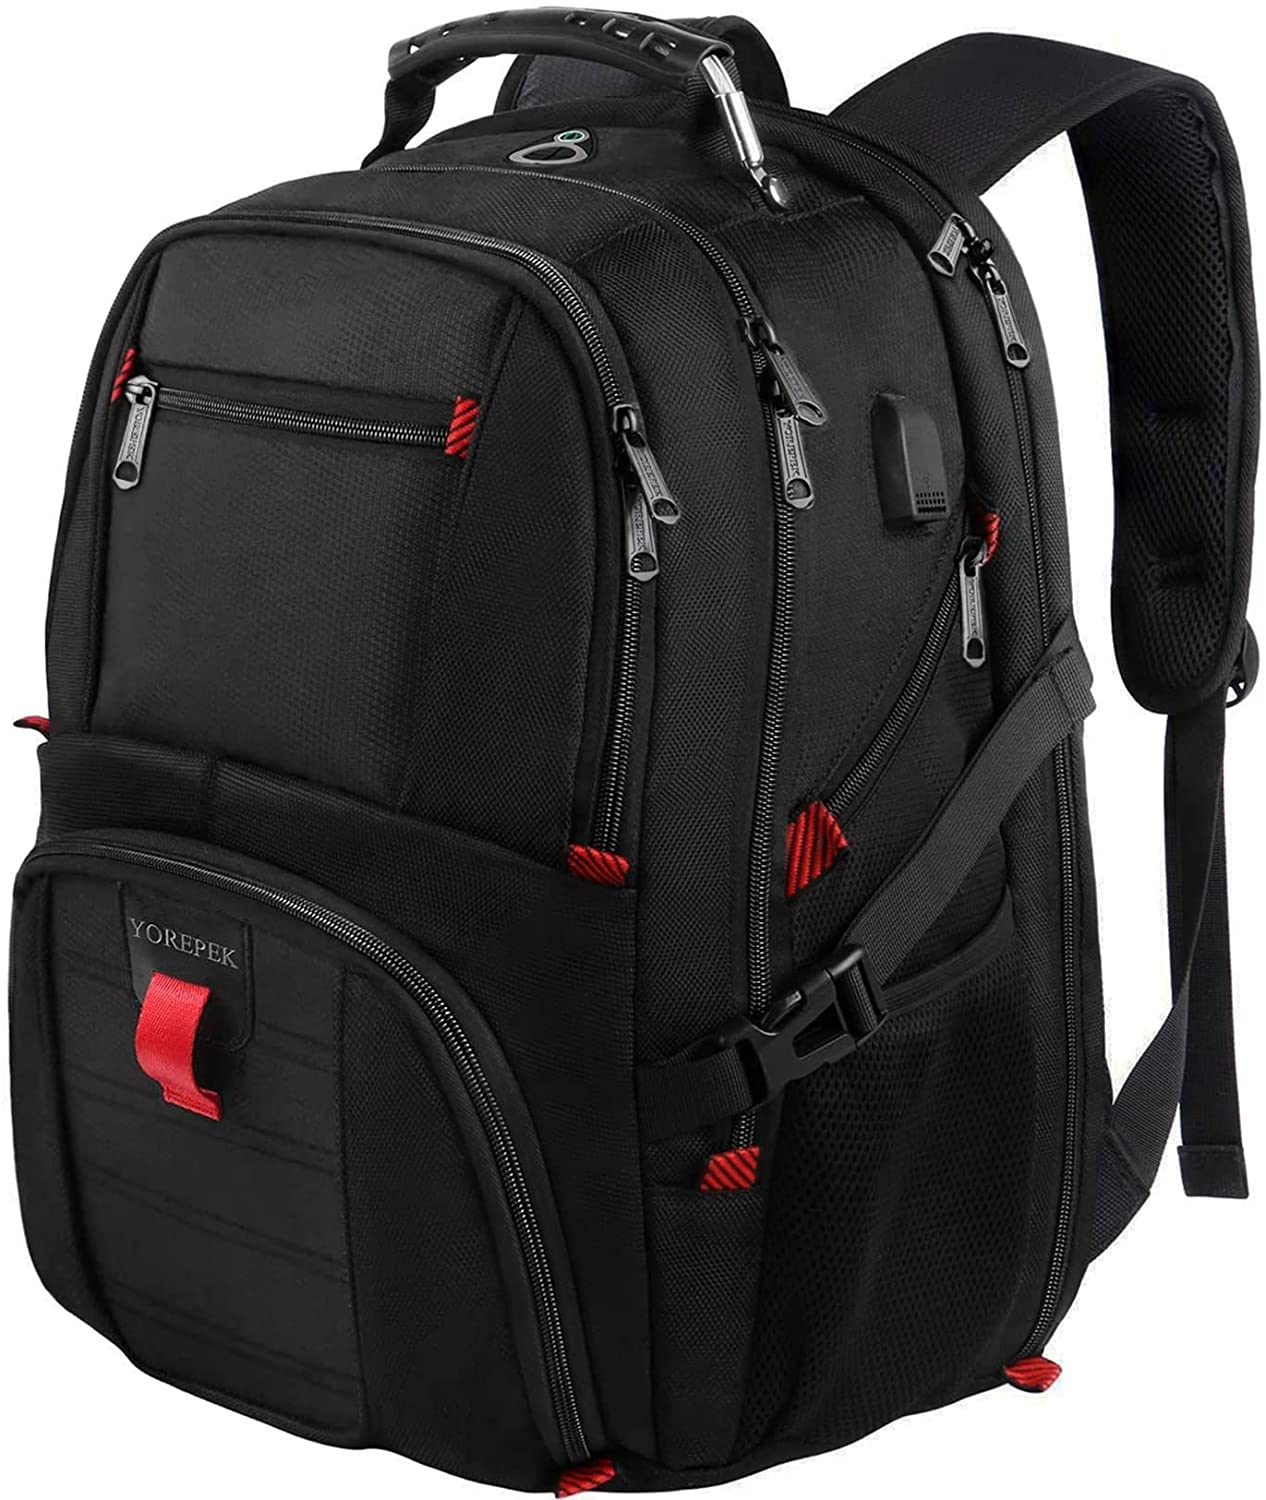 YOREPEK Backpack for Men,Extra Large 50L and similar items